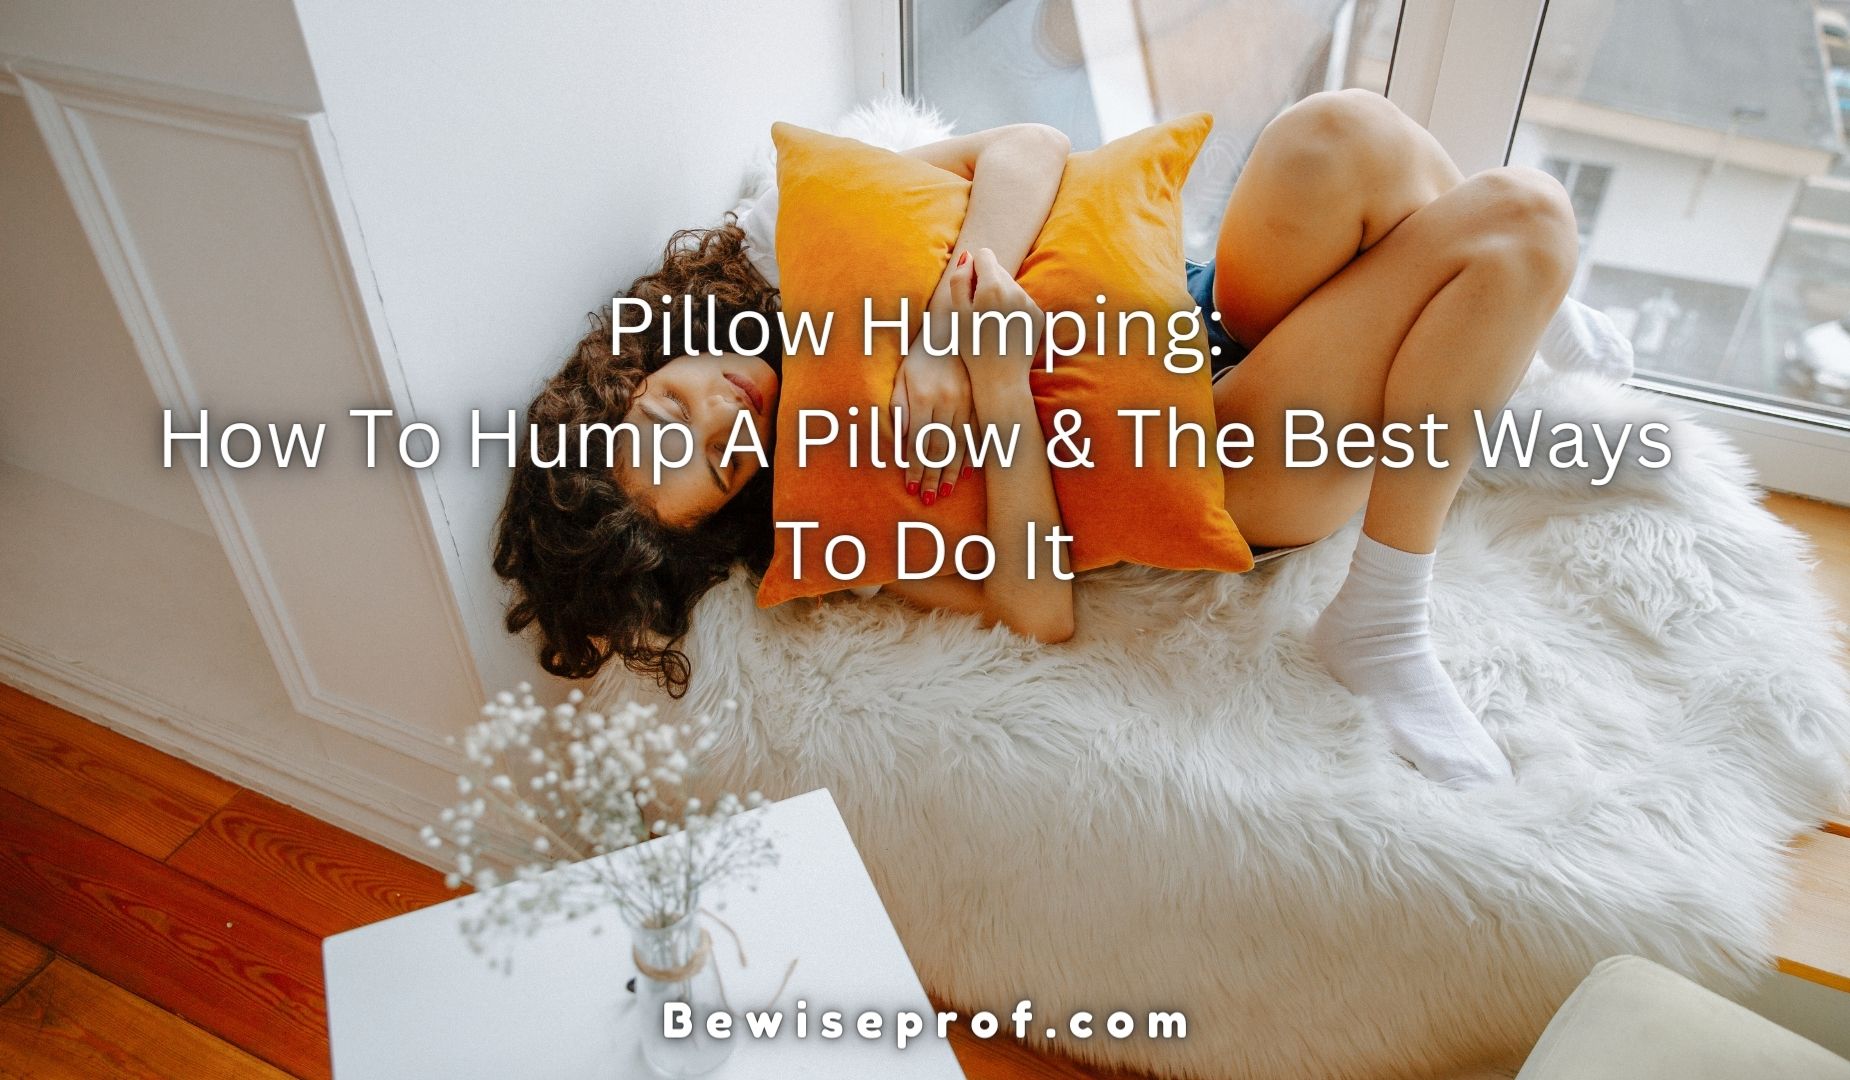 christine cartier add photo how to hump a pillow step by step with pictures